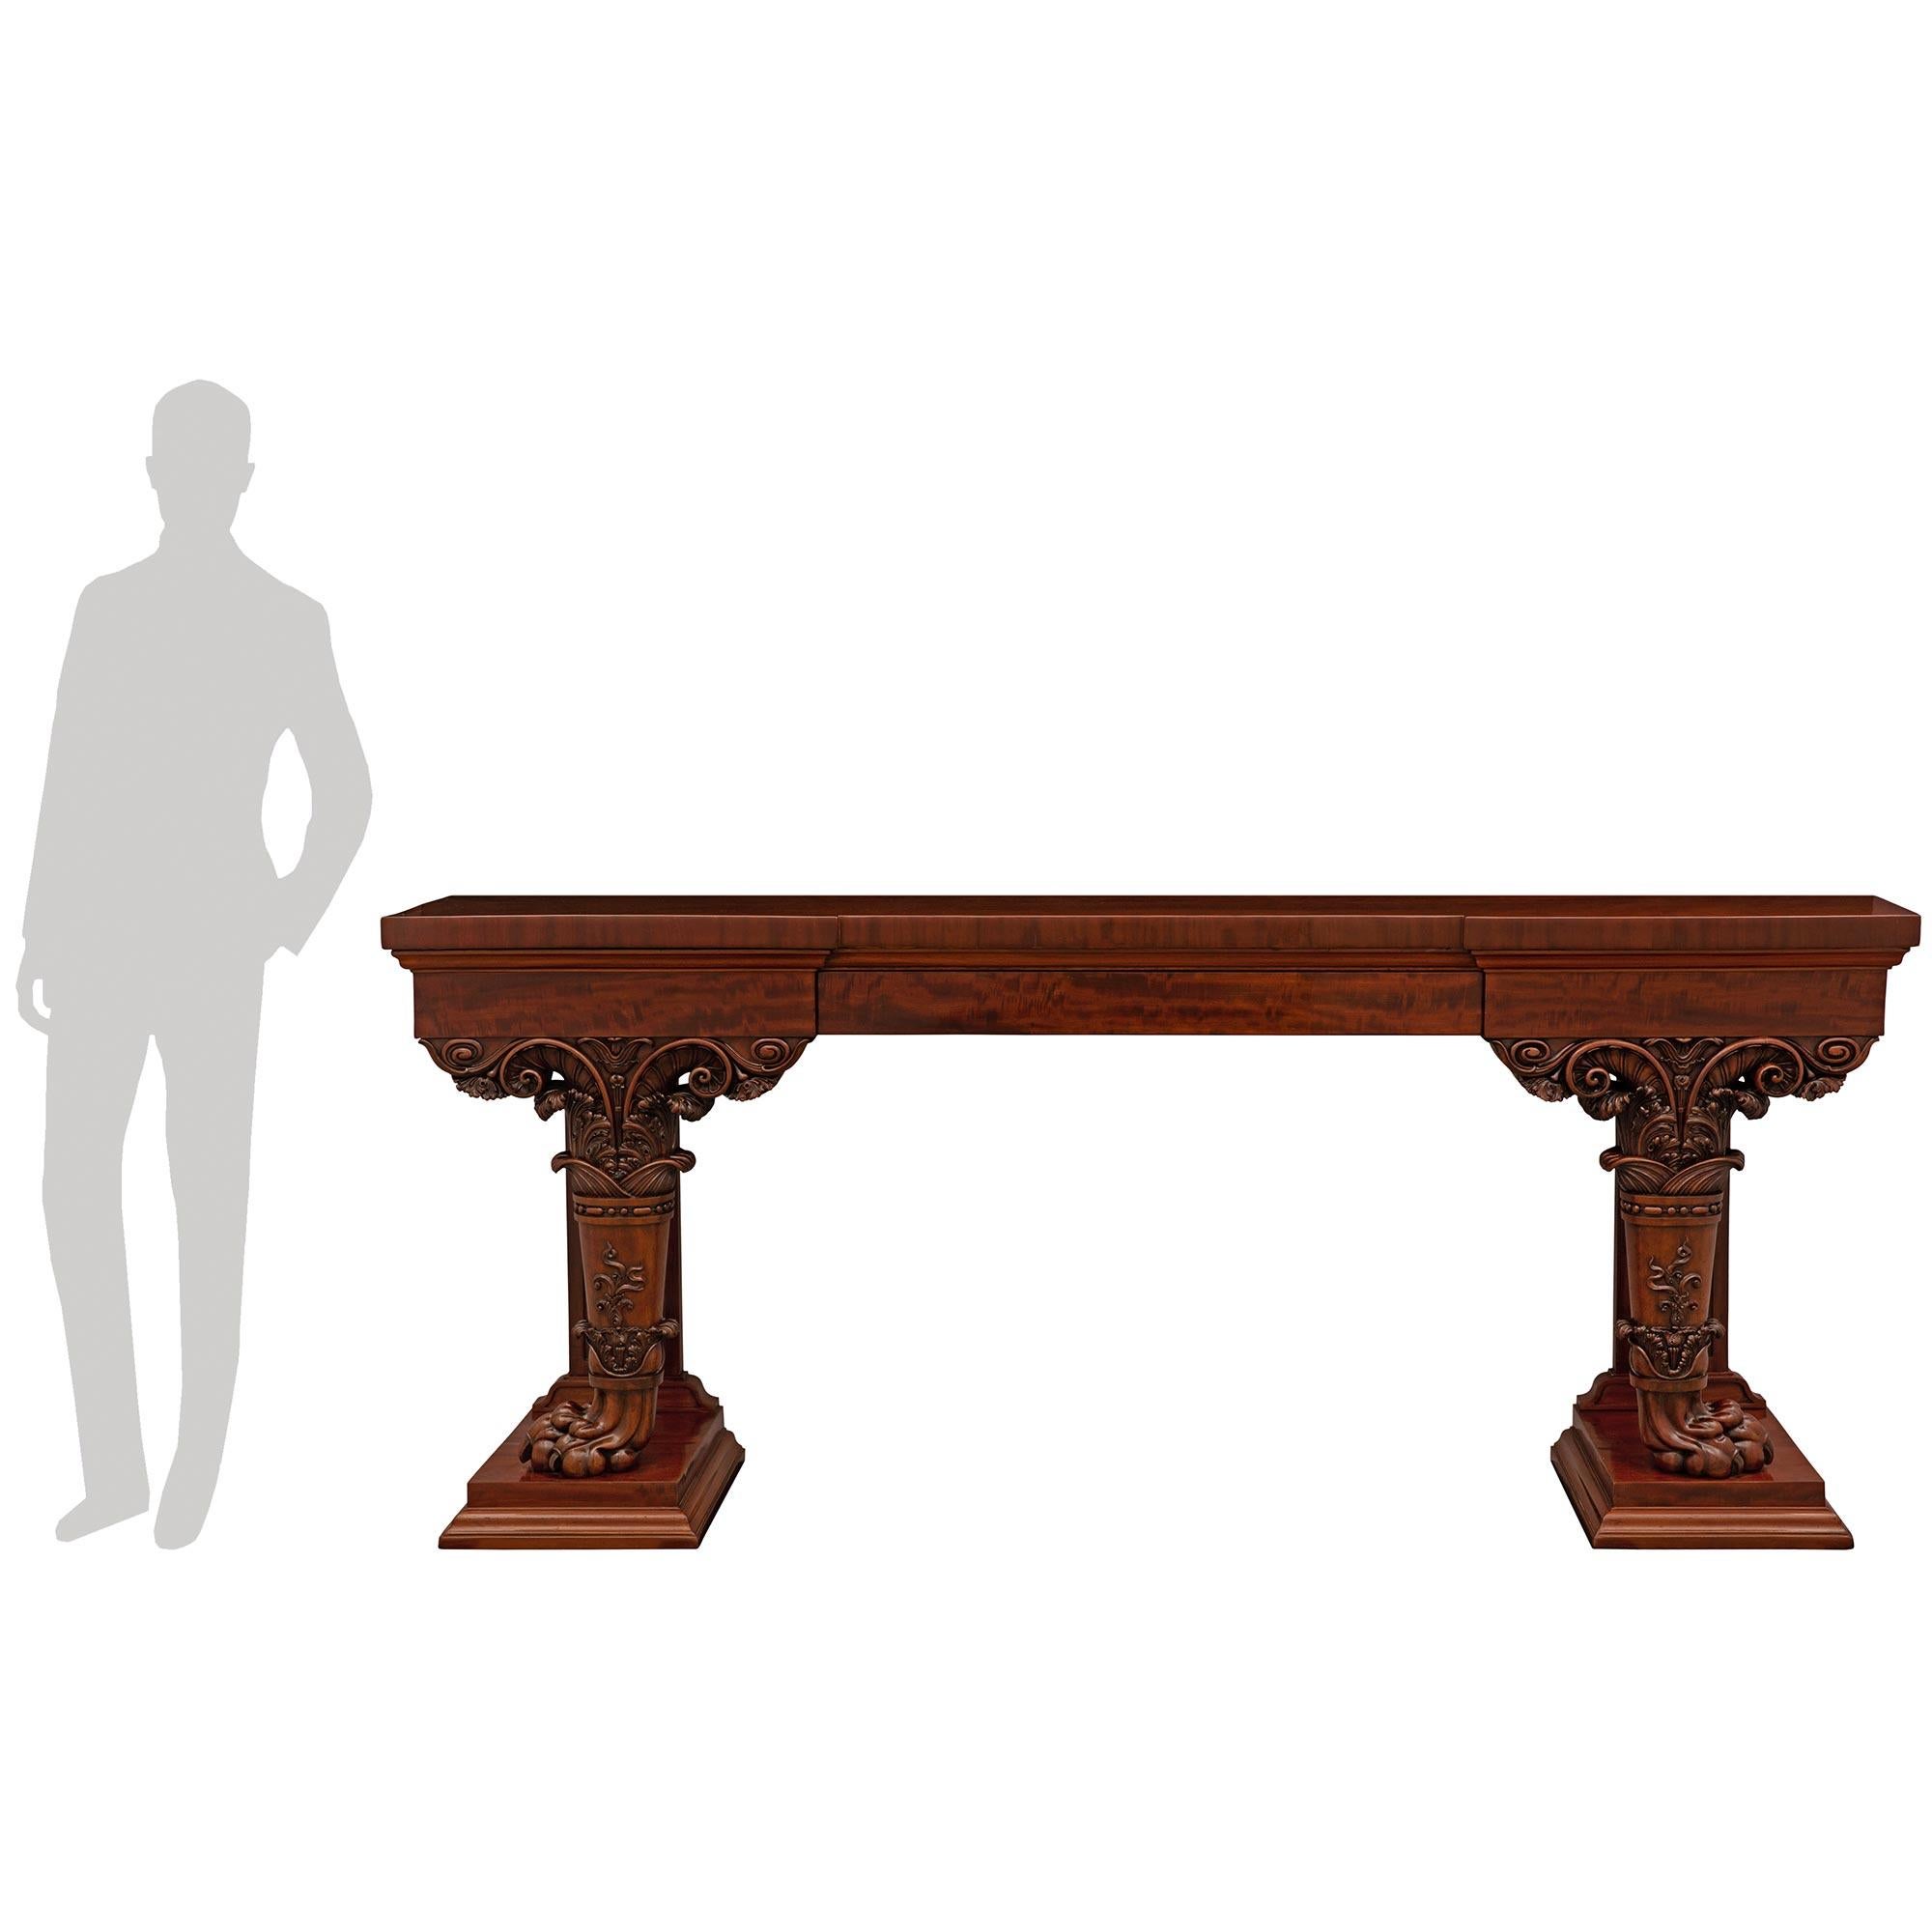 An important and most impressive Italian mid 19th century Moucheté mahogany Regency st. console, possibly by renowned woodworker Peters. The large scale freestanding console is raised by mottled supports below impressive circular tapered legs with